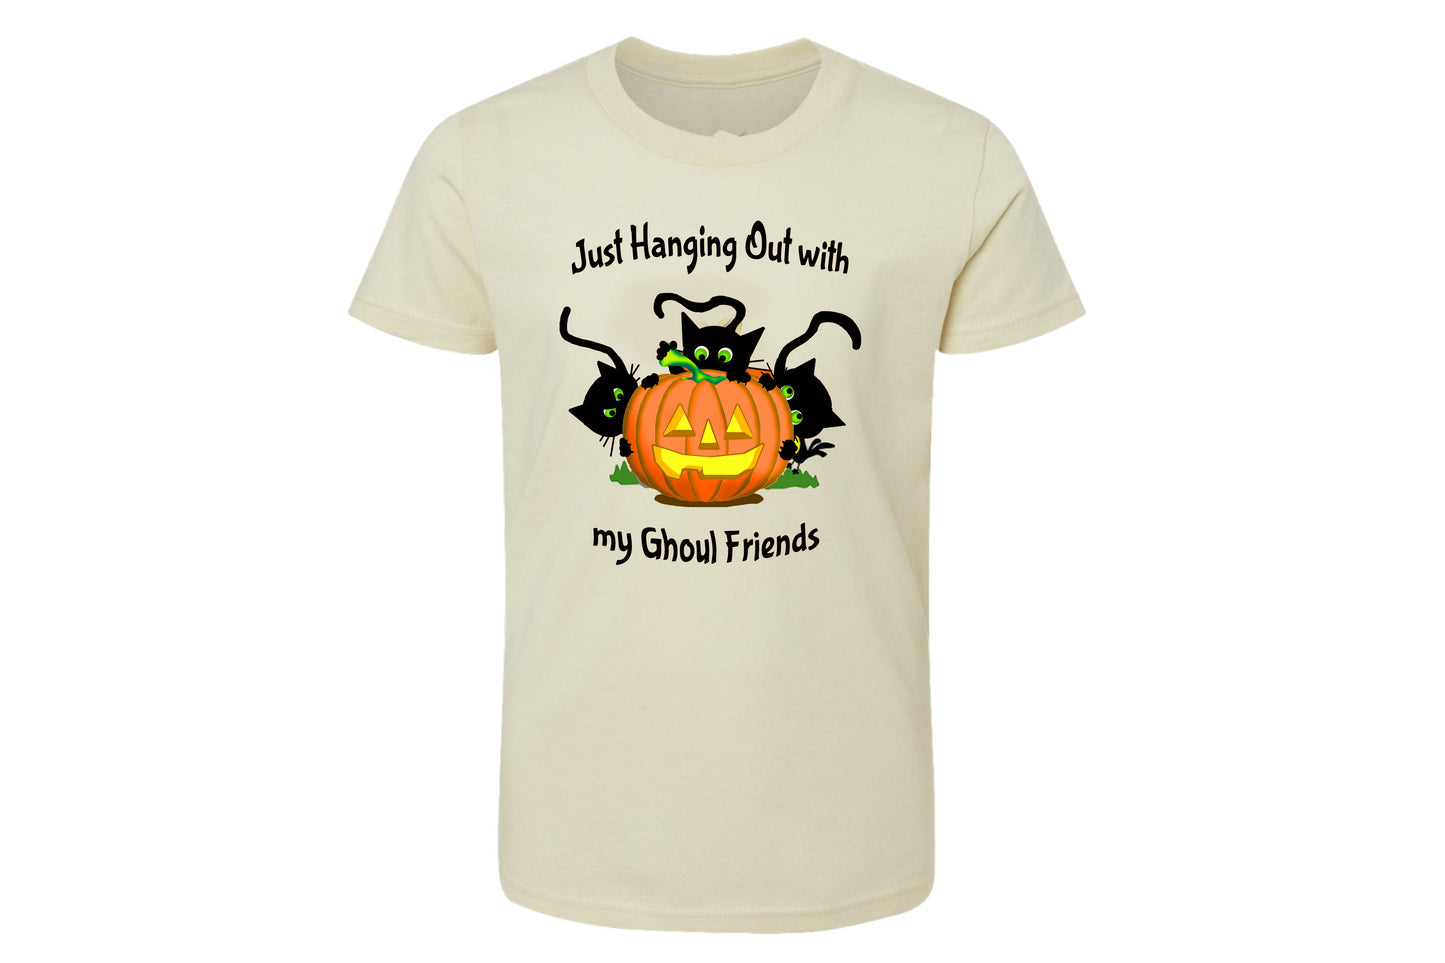 Hanging with my Ghoul Friends on Kids T-shirt